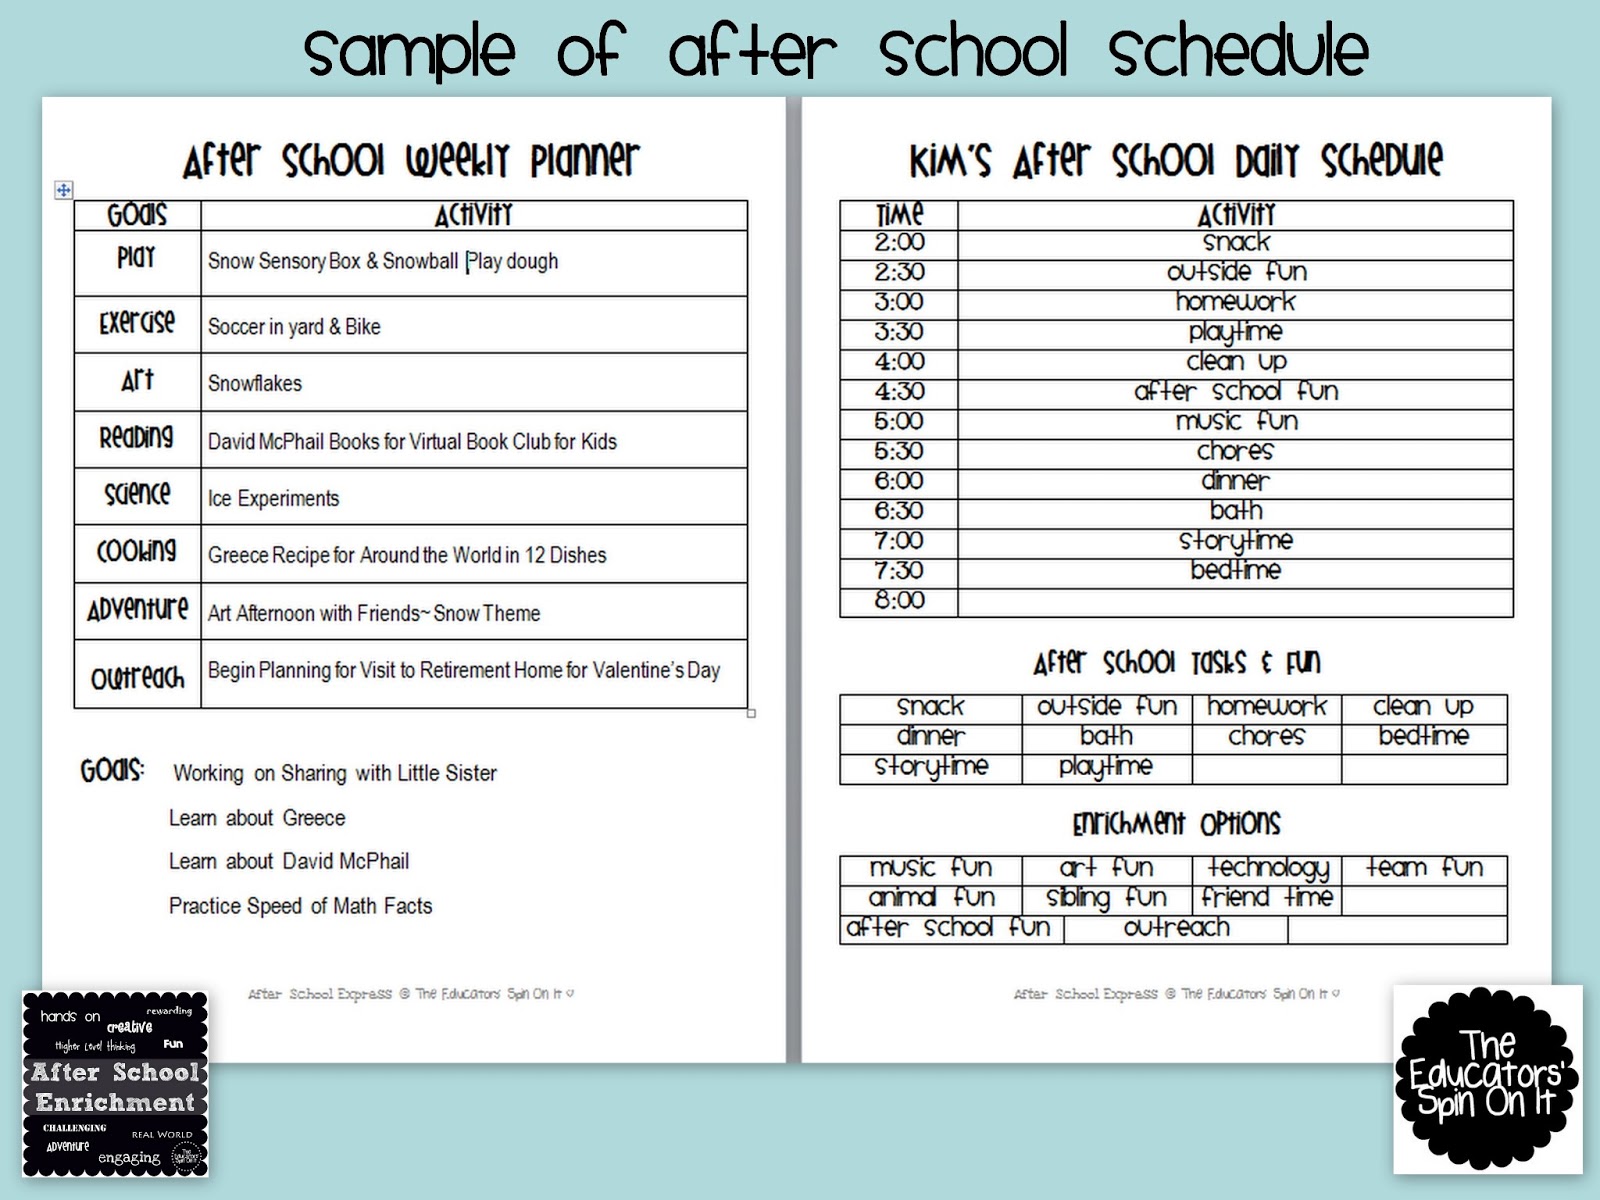 After School Weekly Planner The Educators #39 Spin On It